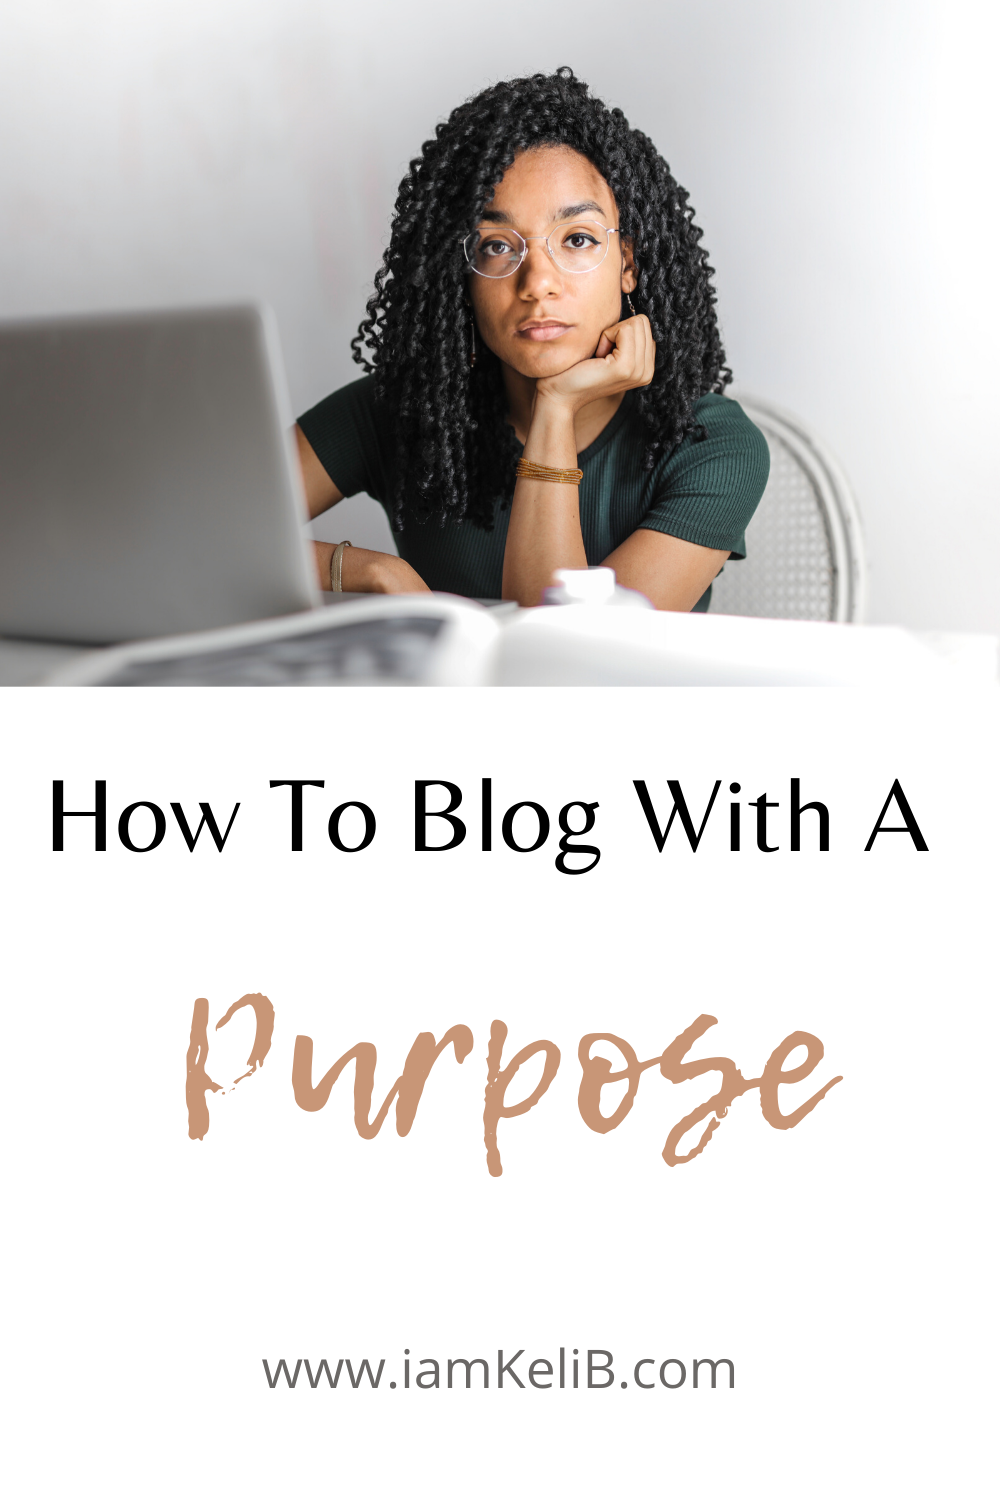 How To Blog With A Purpose